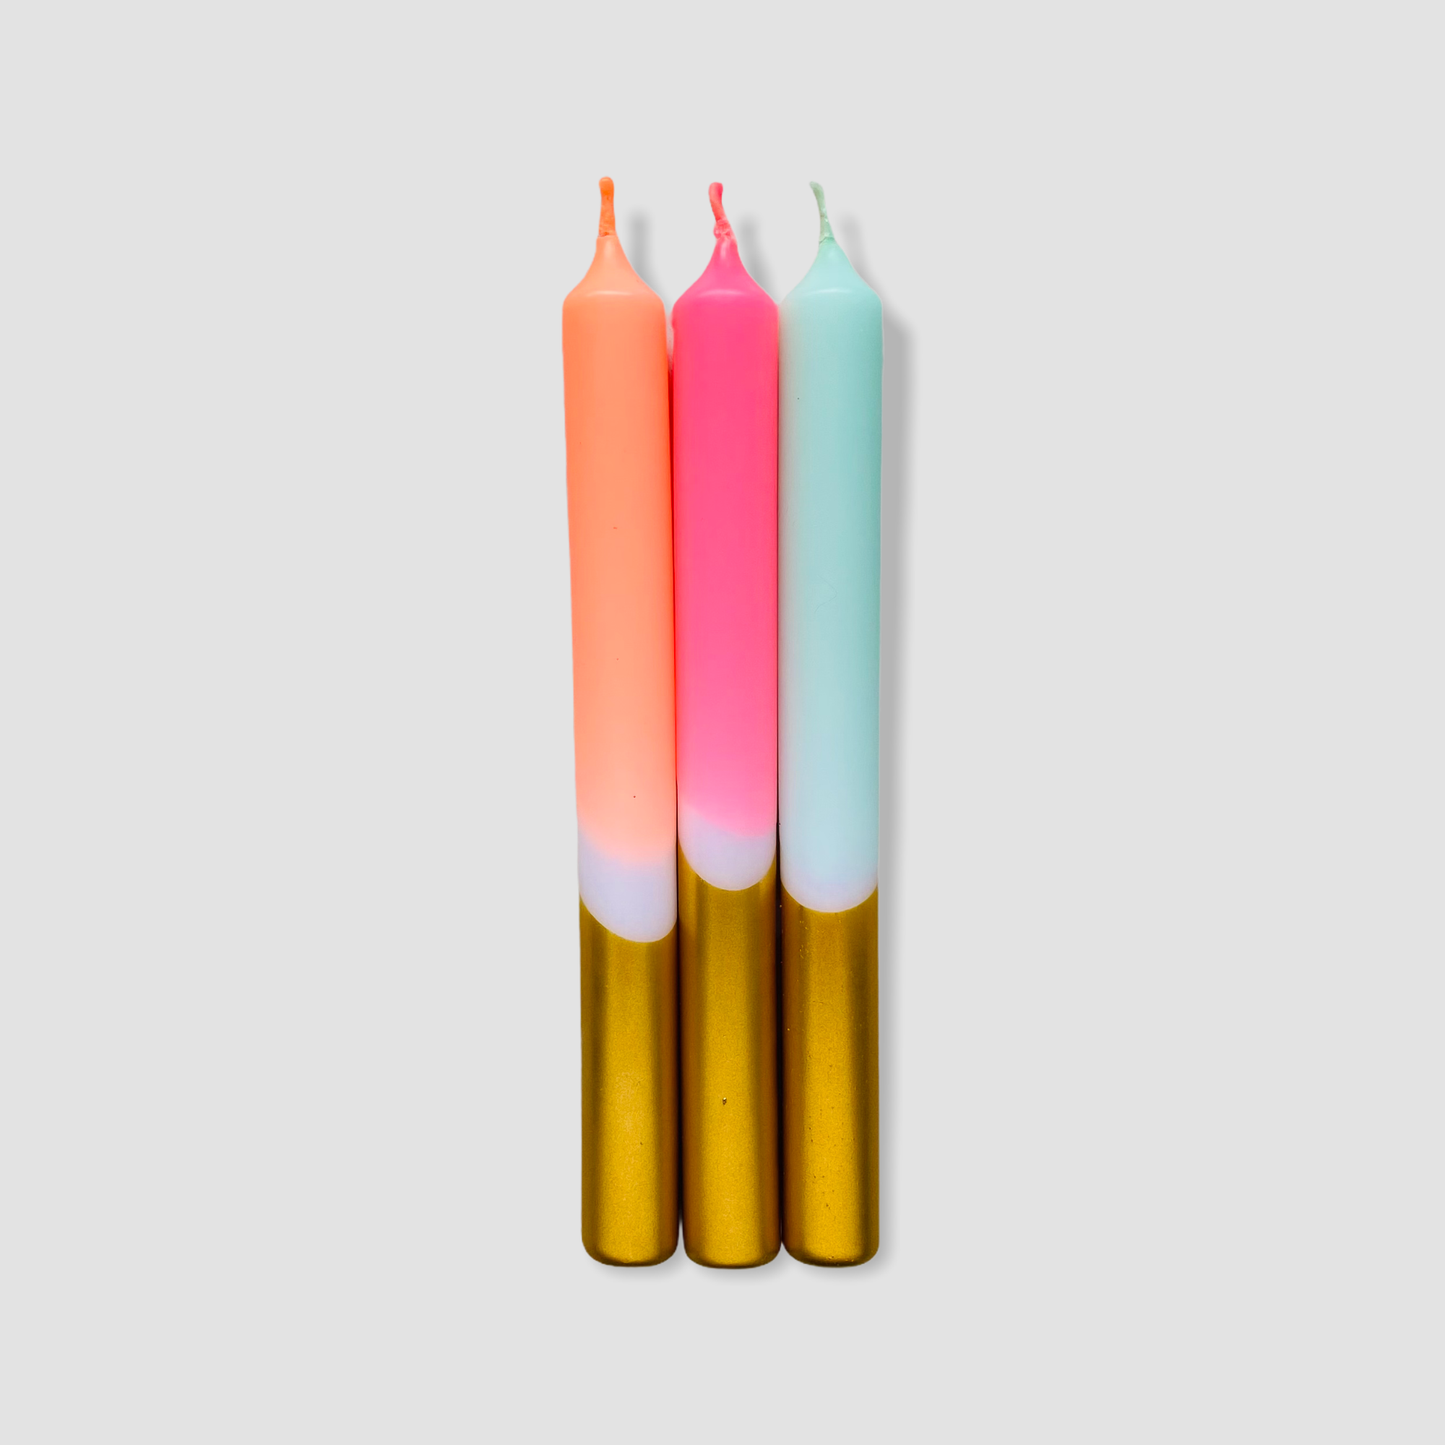 'Christmas' Dip Dye Candles Limited Edition